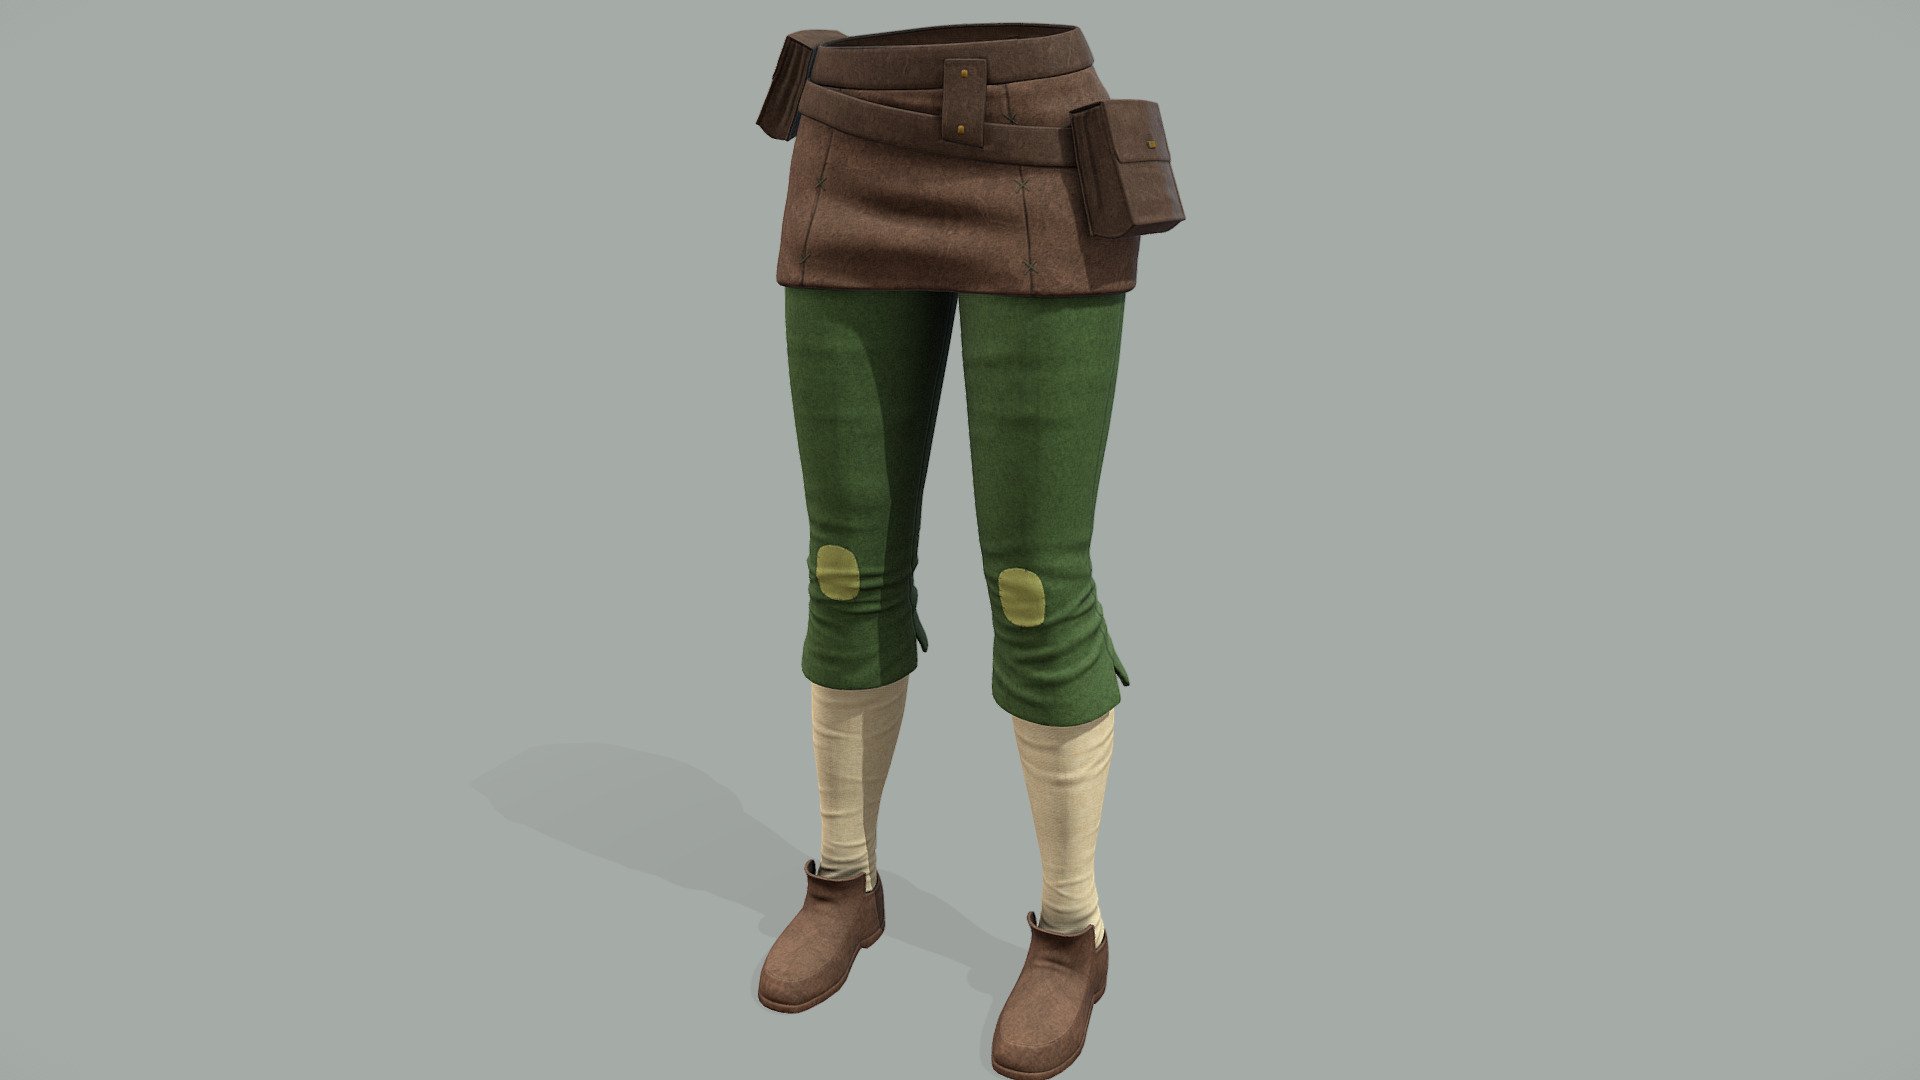 Female Medieval Steampunk Pheasant Pants With Utility Belt And Shoes

Can be fitted to any character

Clean topology

No overlapping smart optimized unwrapped UVs

High-quality realistic textures

FBX, OBJ, gITF, USDZ (request other formats)

PBR or Classic

Type     user:3dia &ldquo;search term